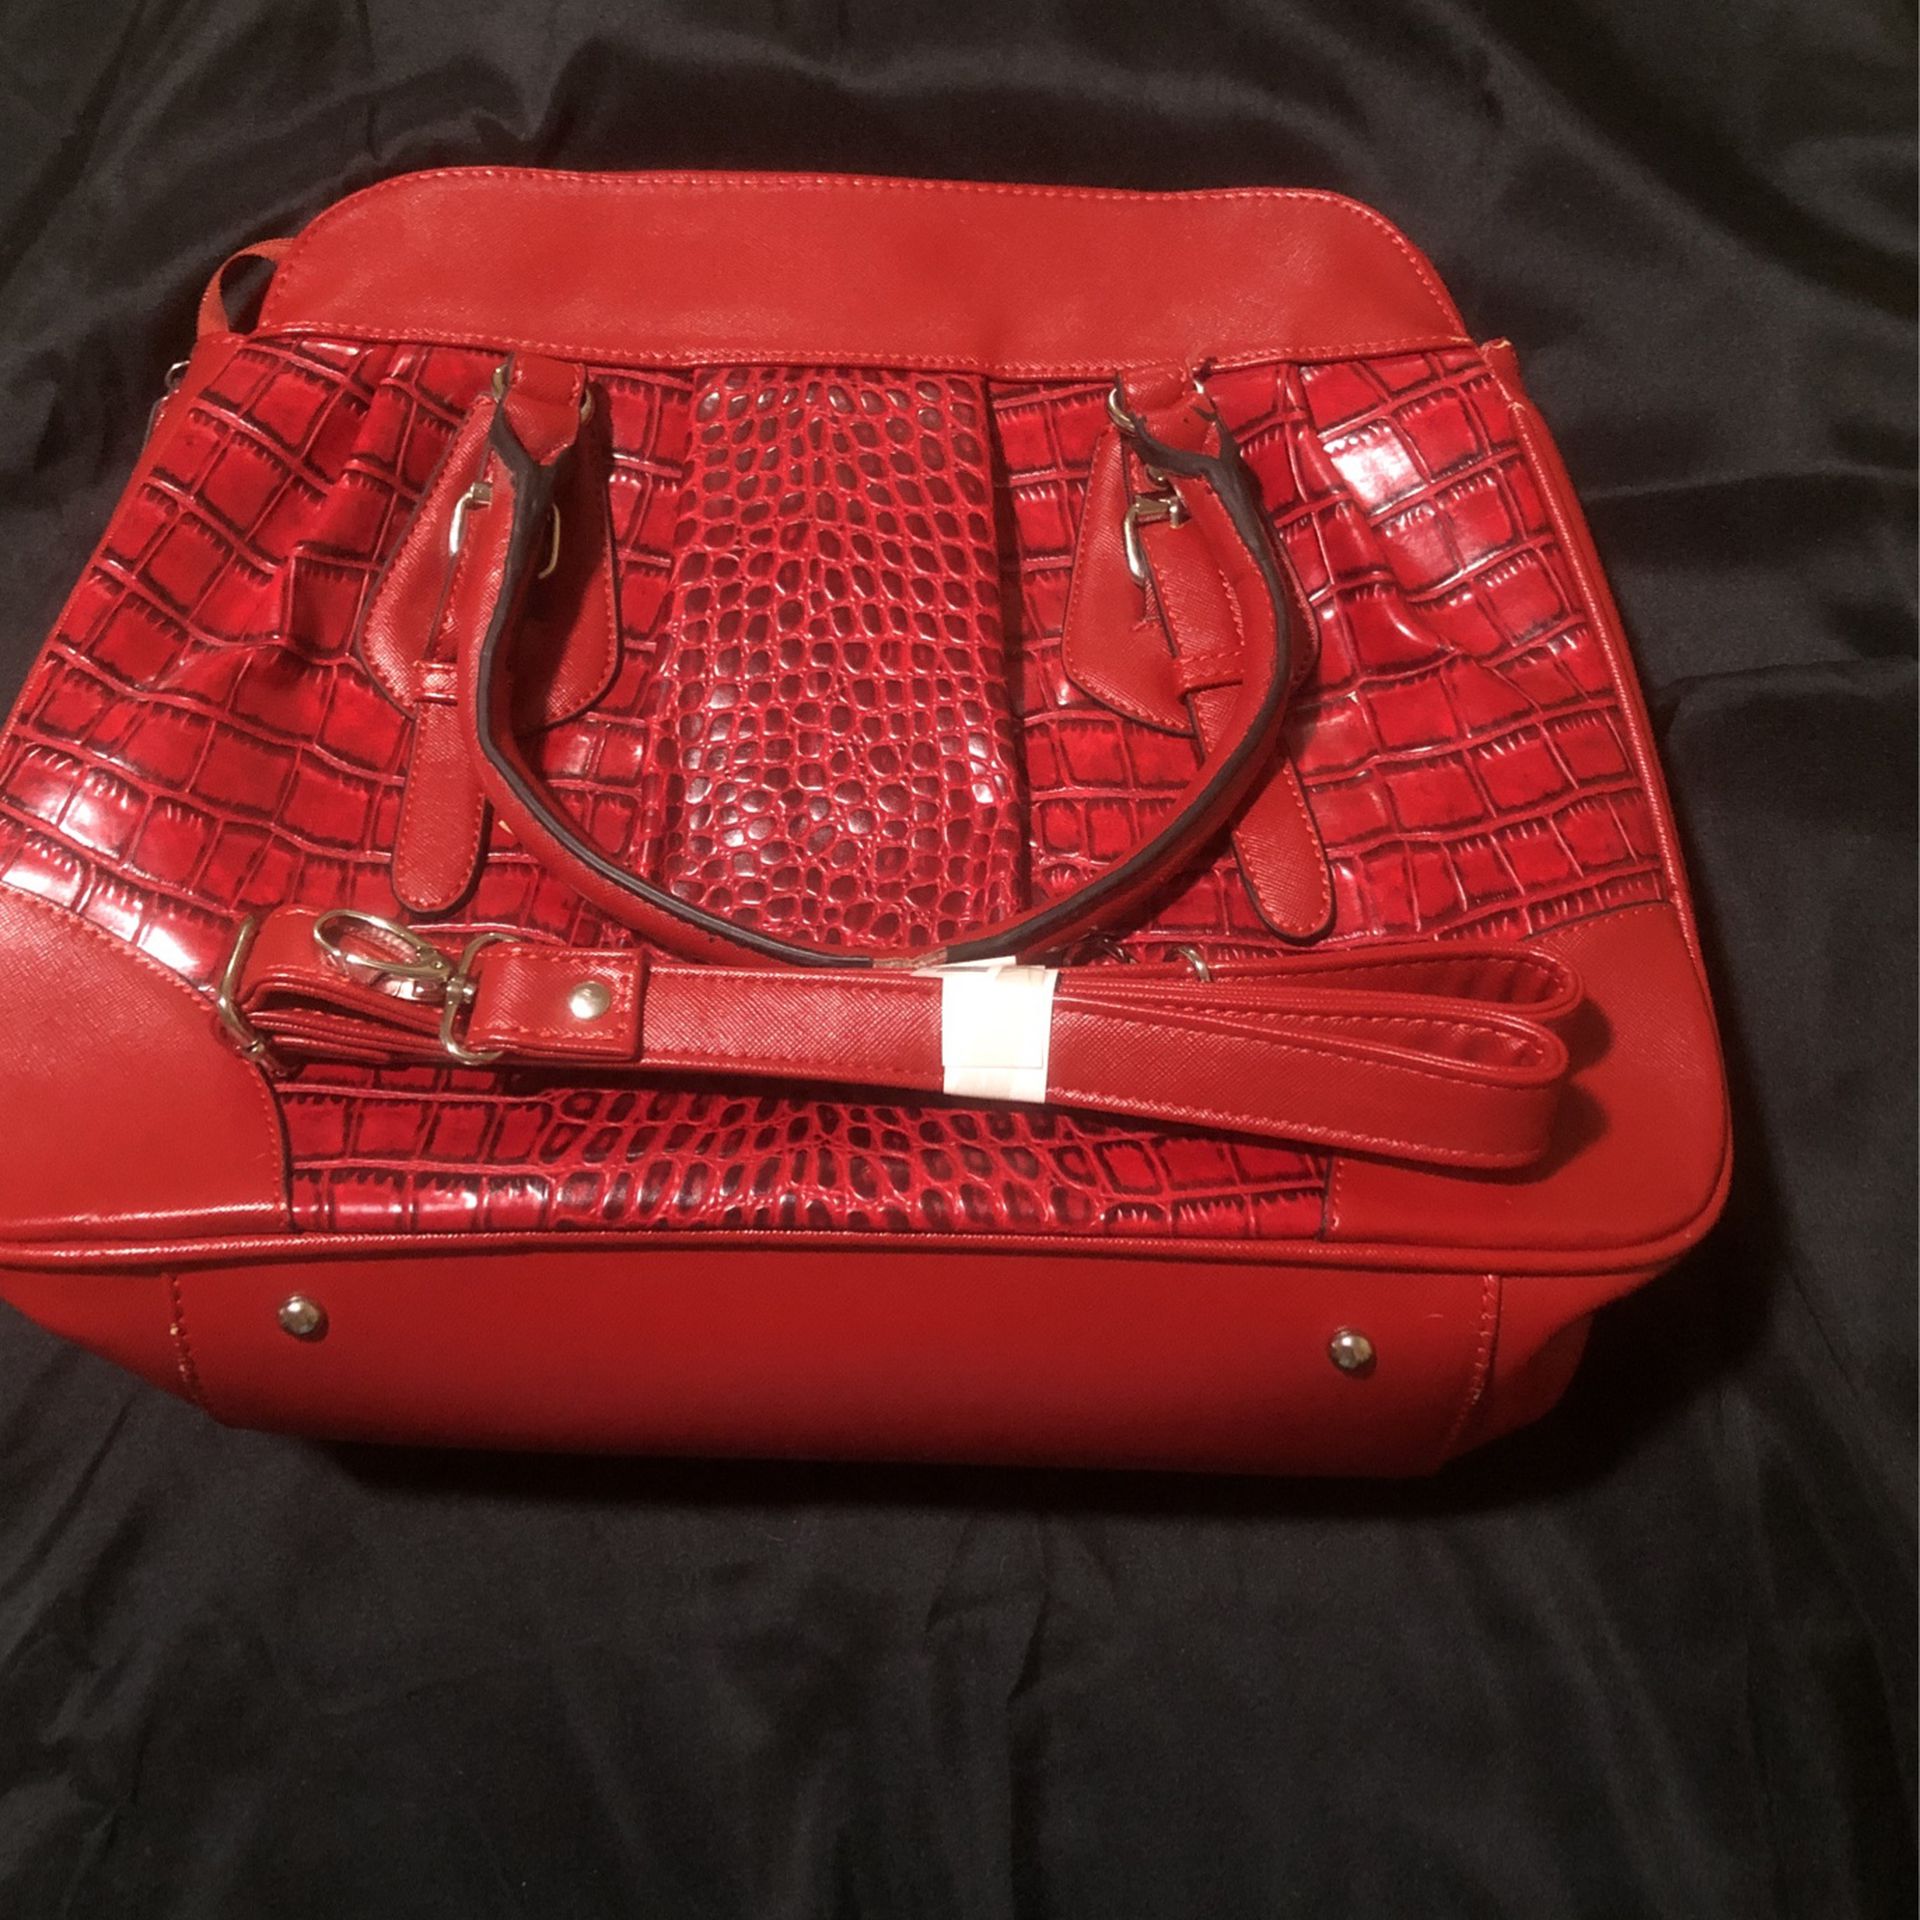 Red Studded Handbag With Prints And Strap 